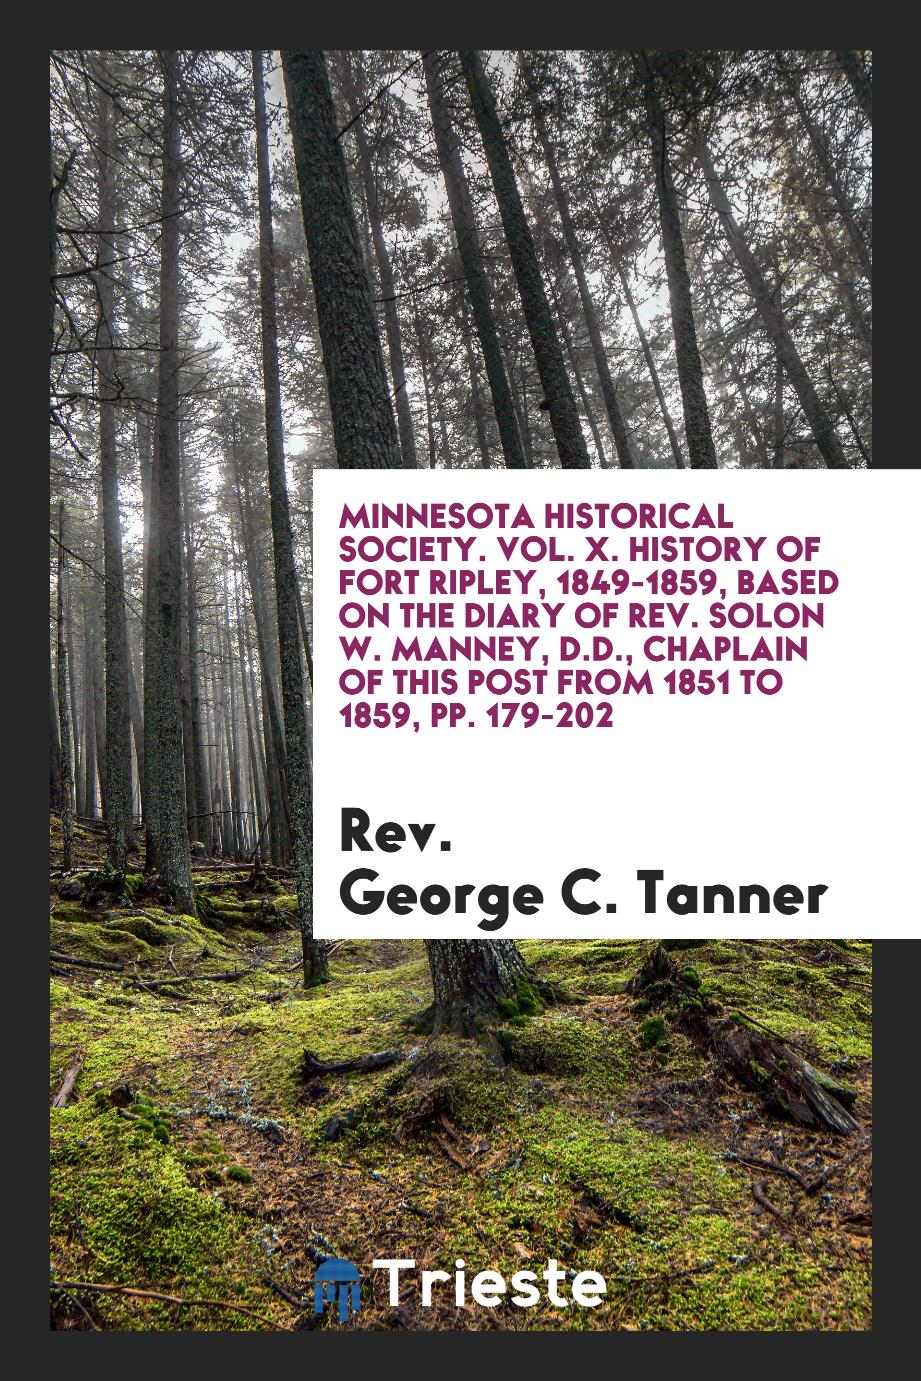 Minnesota Historical Society. Vol. X. History of Fort Ripley, 1849-1859, Based on the Diary of Rev. Solon W. Manney, D.D., Chaplain of This Post from 1851 to 1859, pp. 179-202